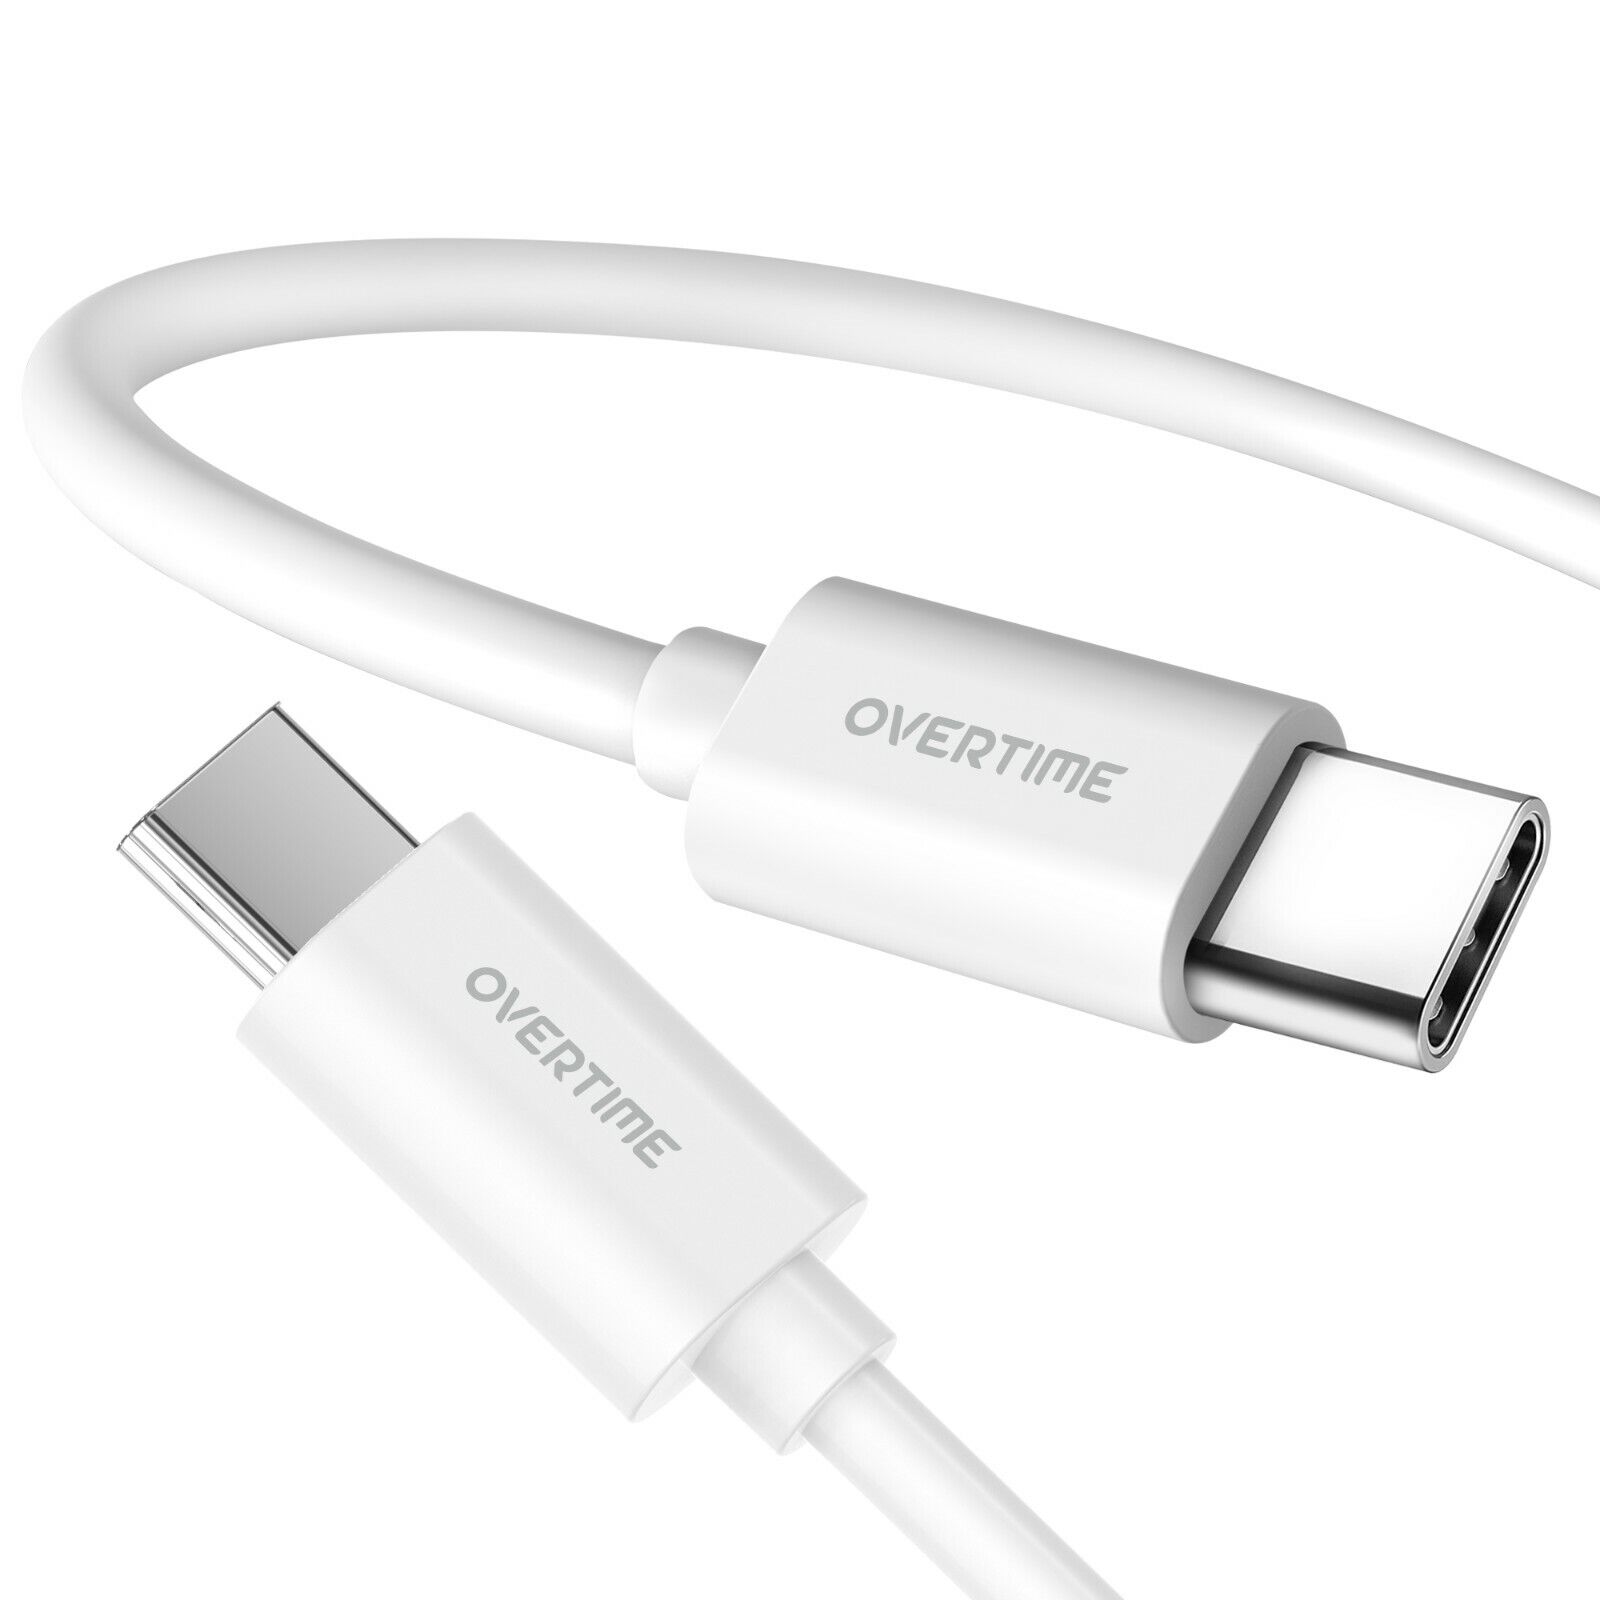 Overtime USB Type C Cable, 10ft Long Charging Cord for iPad Pro and Android